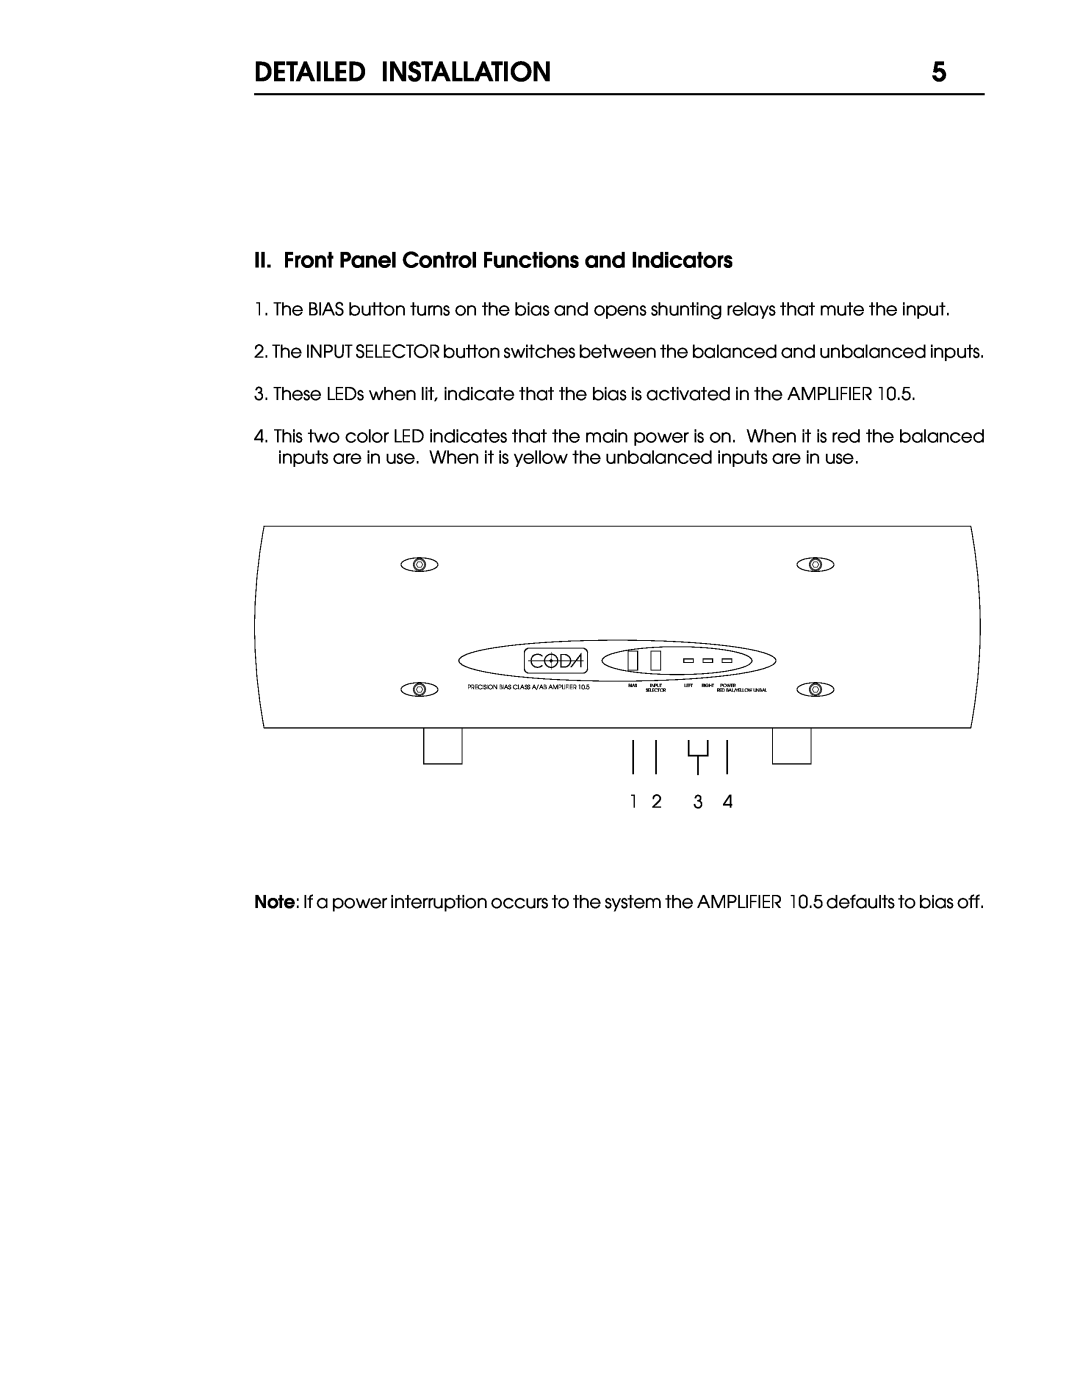 Coda 10.5 operation manual Detailed Installation, II. Front Panel Control Functions and Indicators 